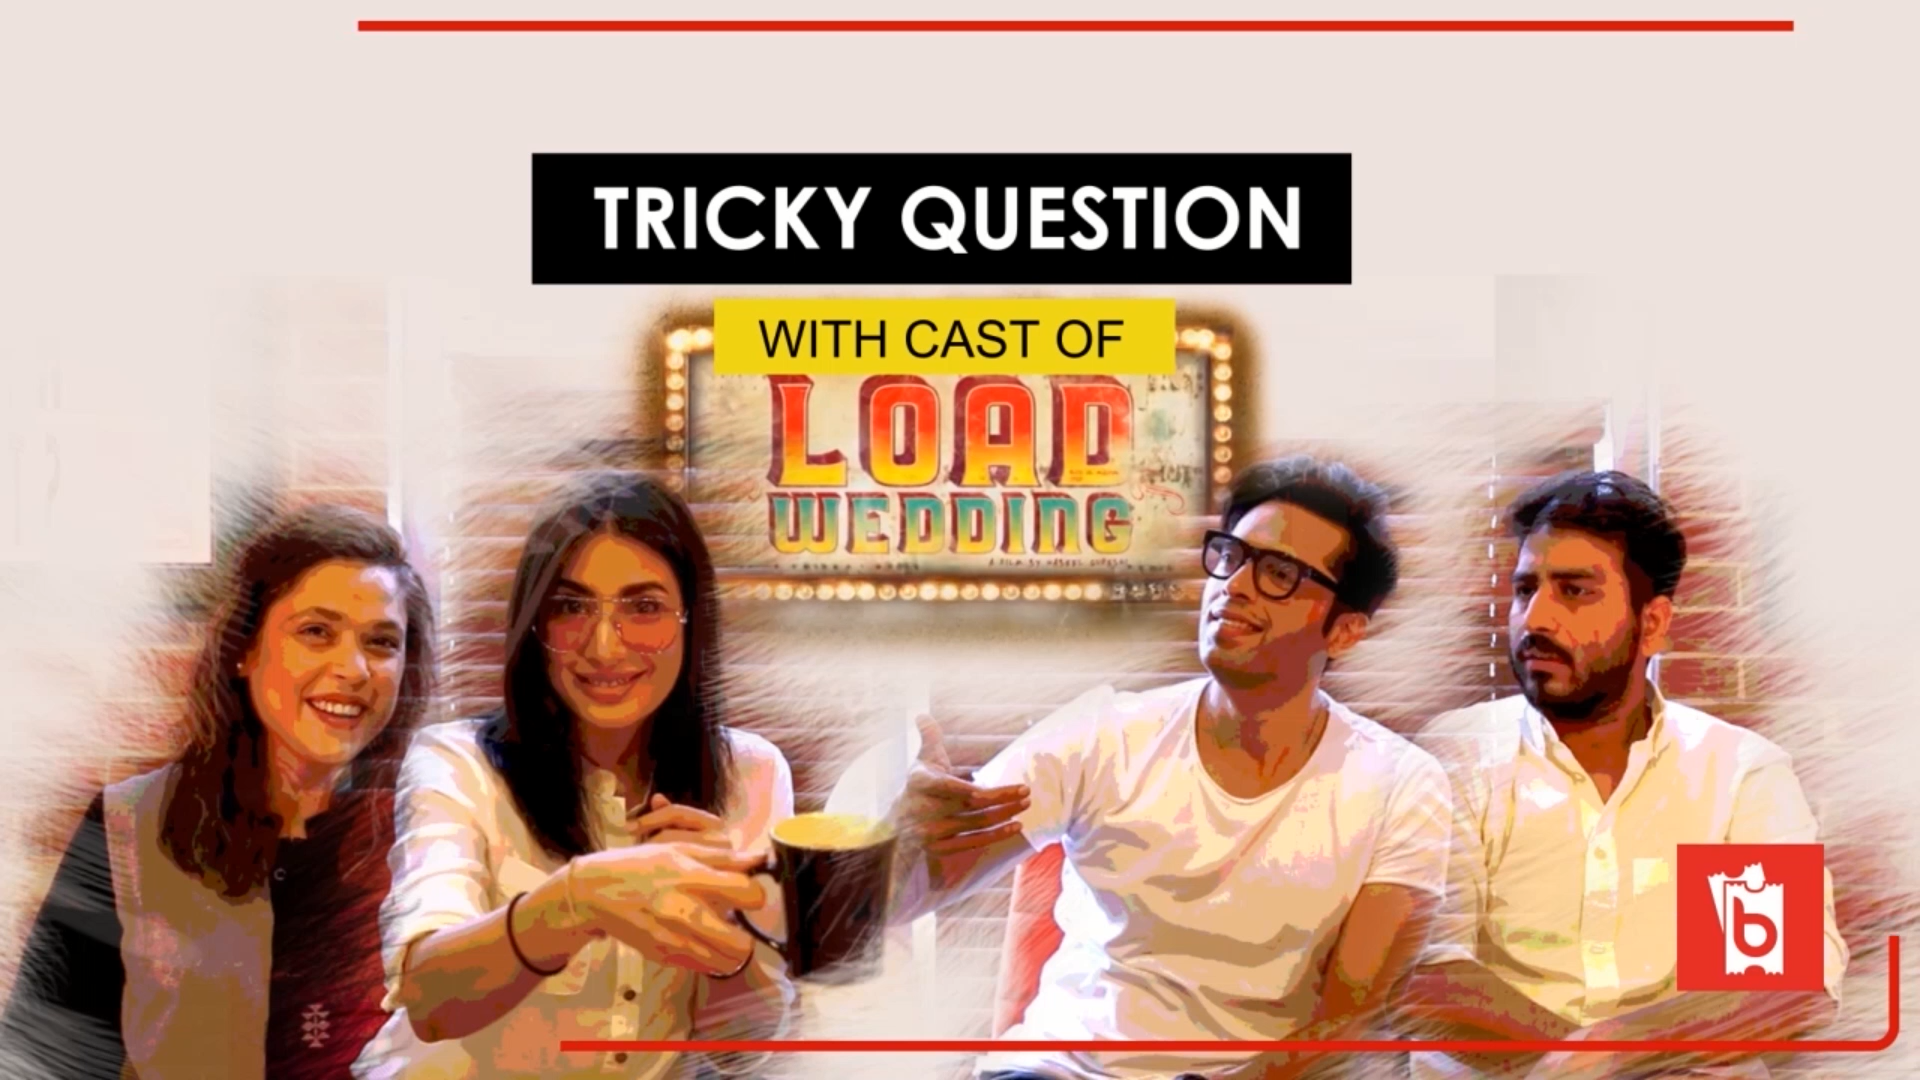 Tricky Questions with Fahad Mustafa and Mehwish Hayat